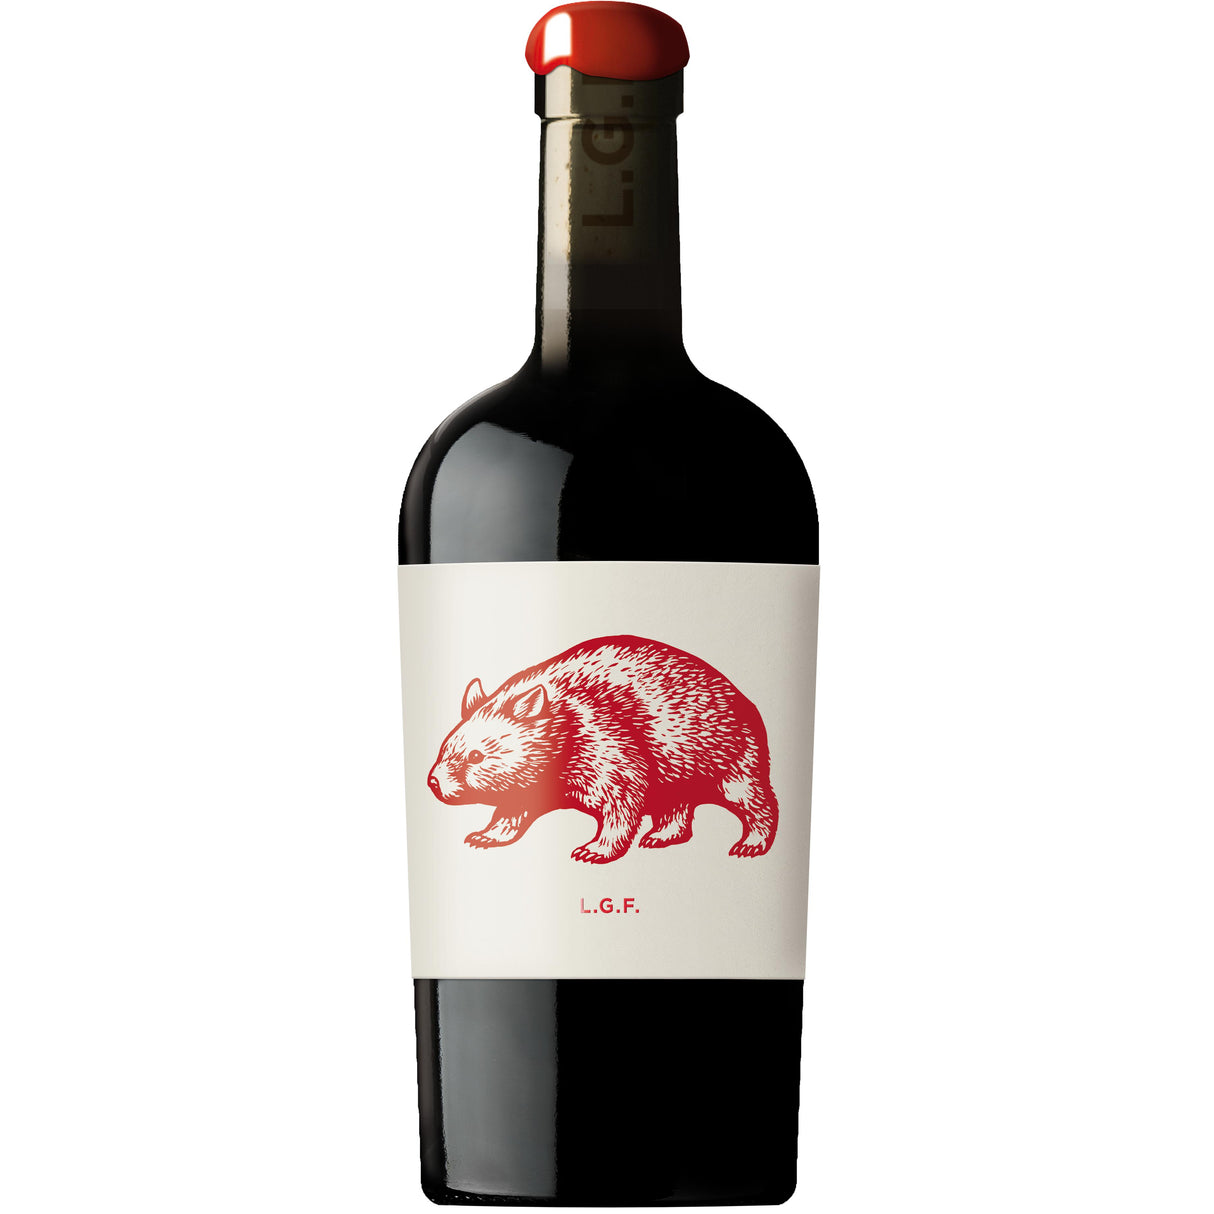 Little Giant 'Free' Cabernet 2021-Red Wine-World Wine